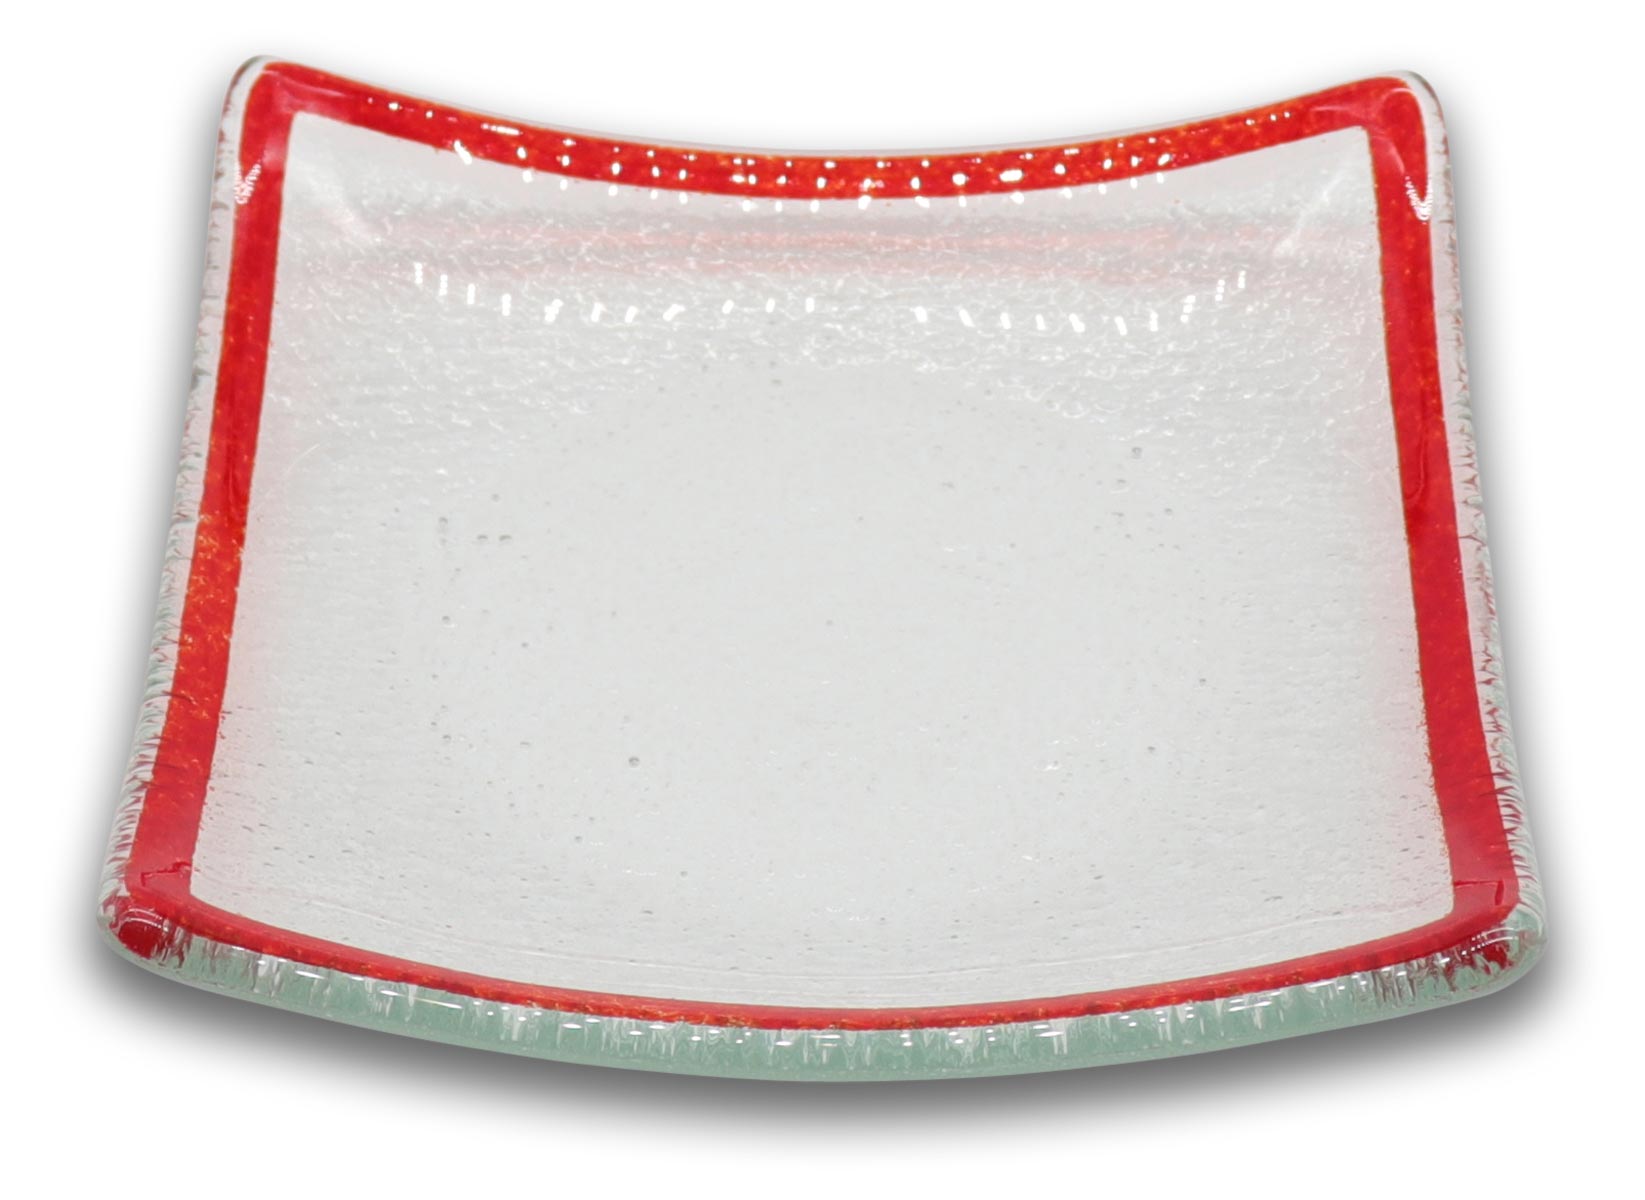 Vaulted glass plate with border bordeaux